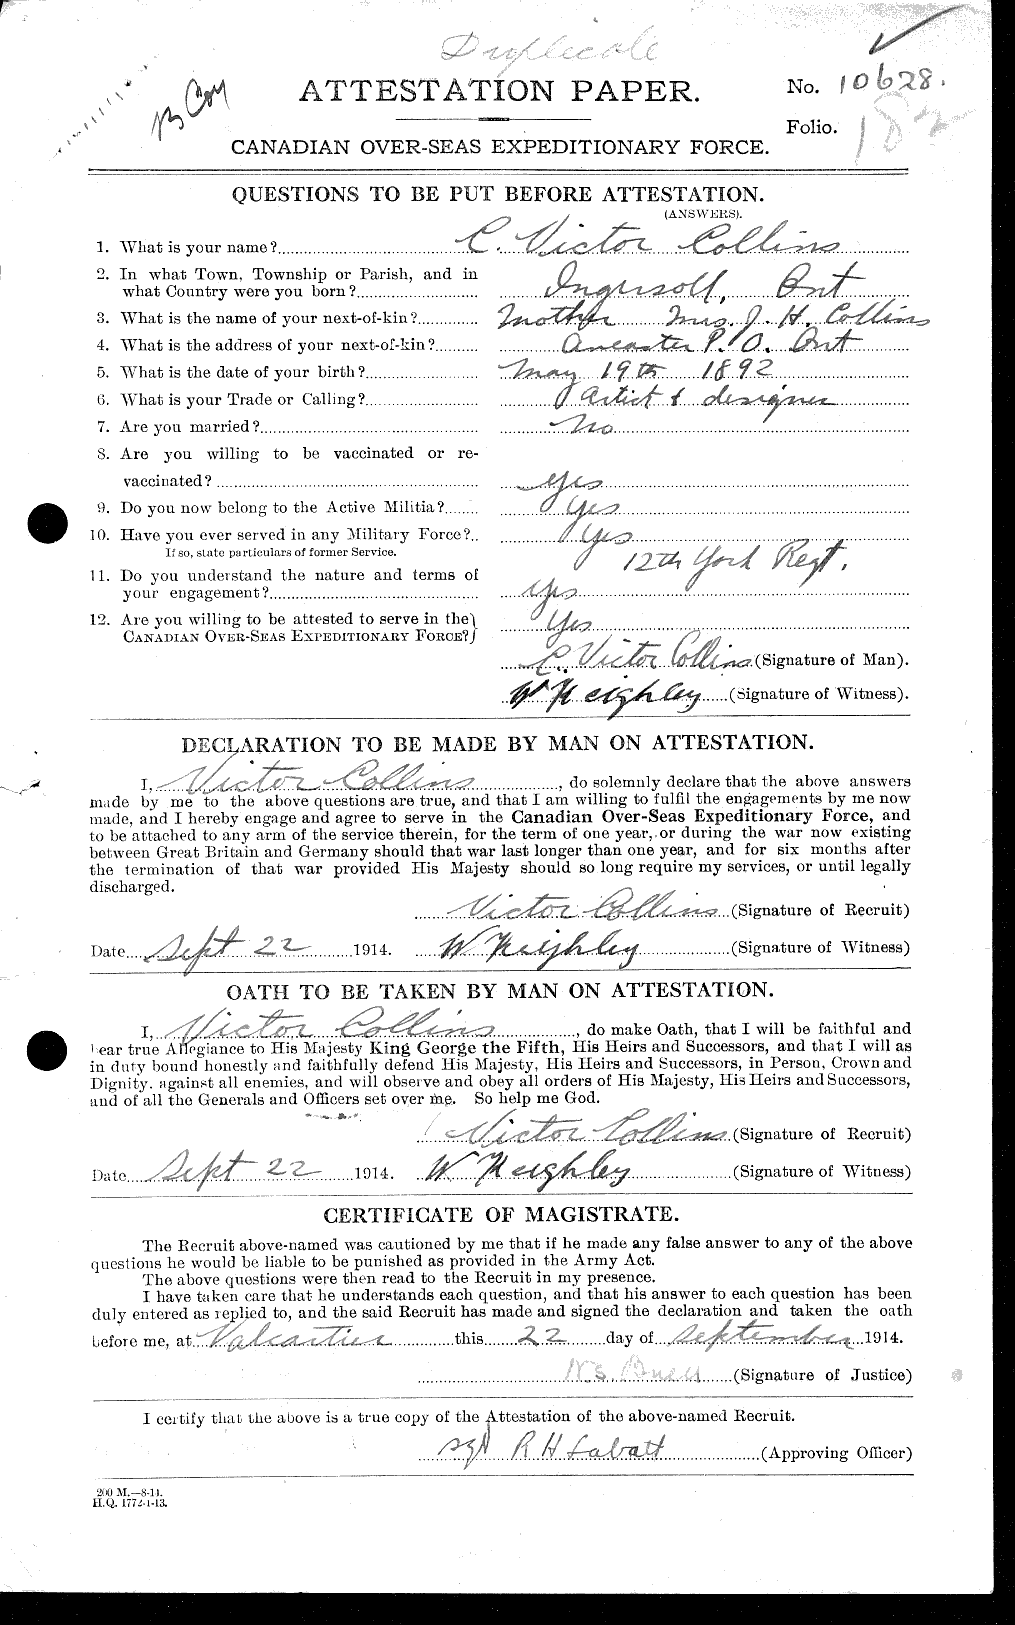 Personnel Records of the First World War - CEF 029051a